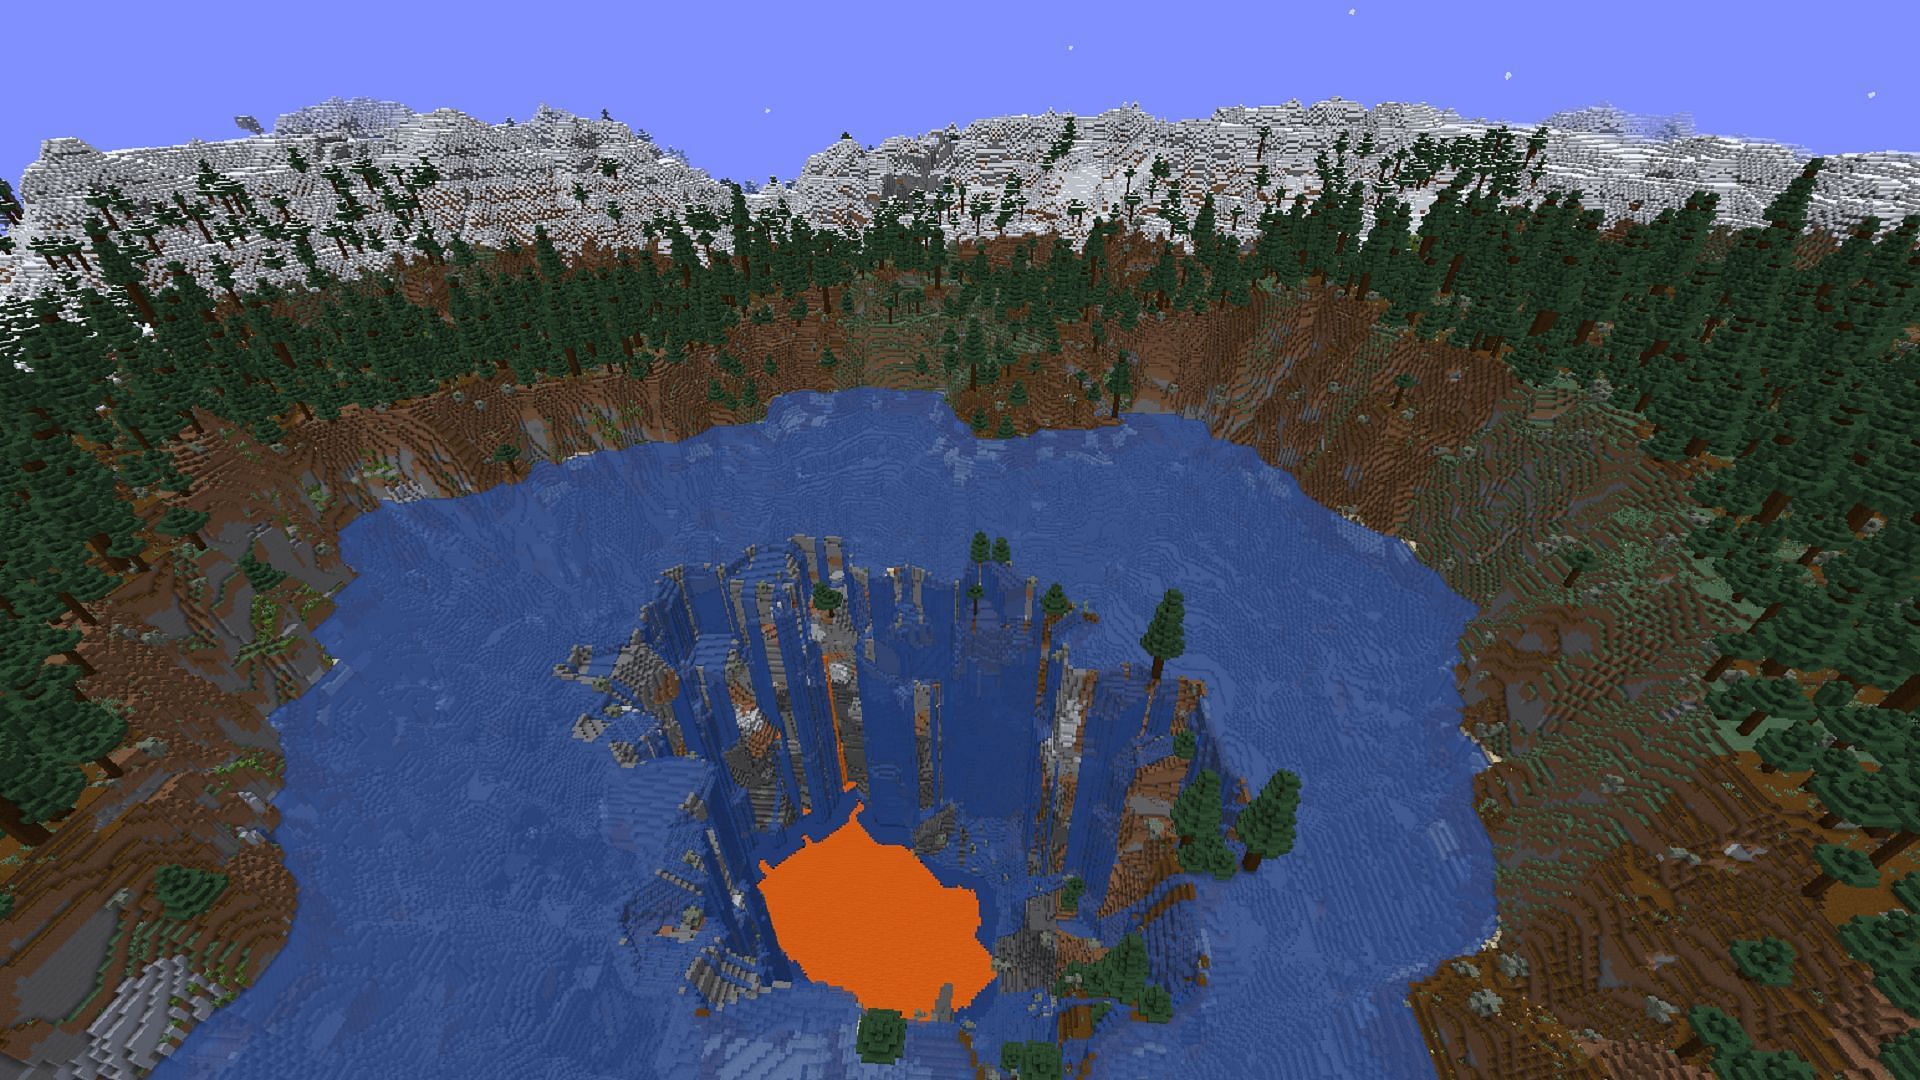 The massive sinkhole next to this seed&#039;s spawn point is a sight to behold (Image via u/crackedMagnet/Reddit)